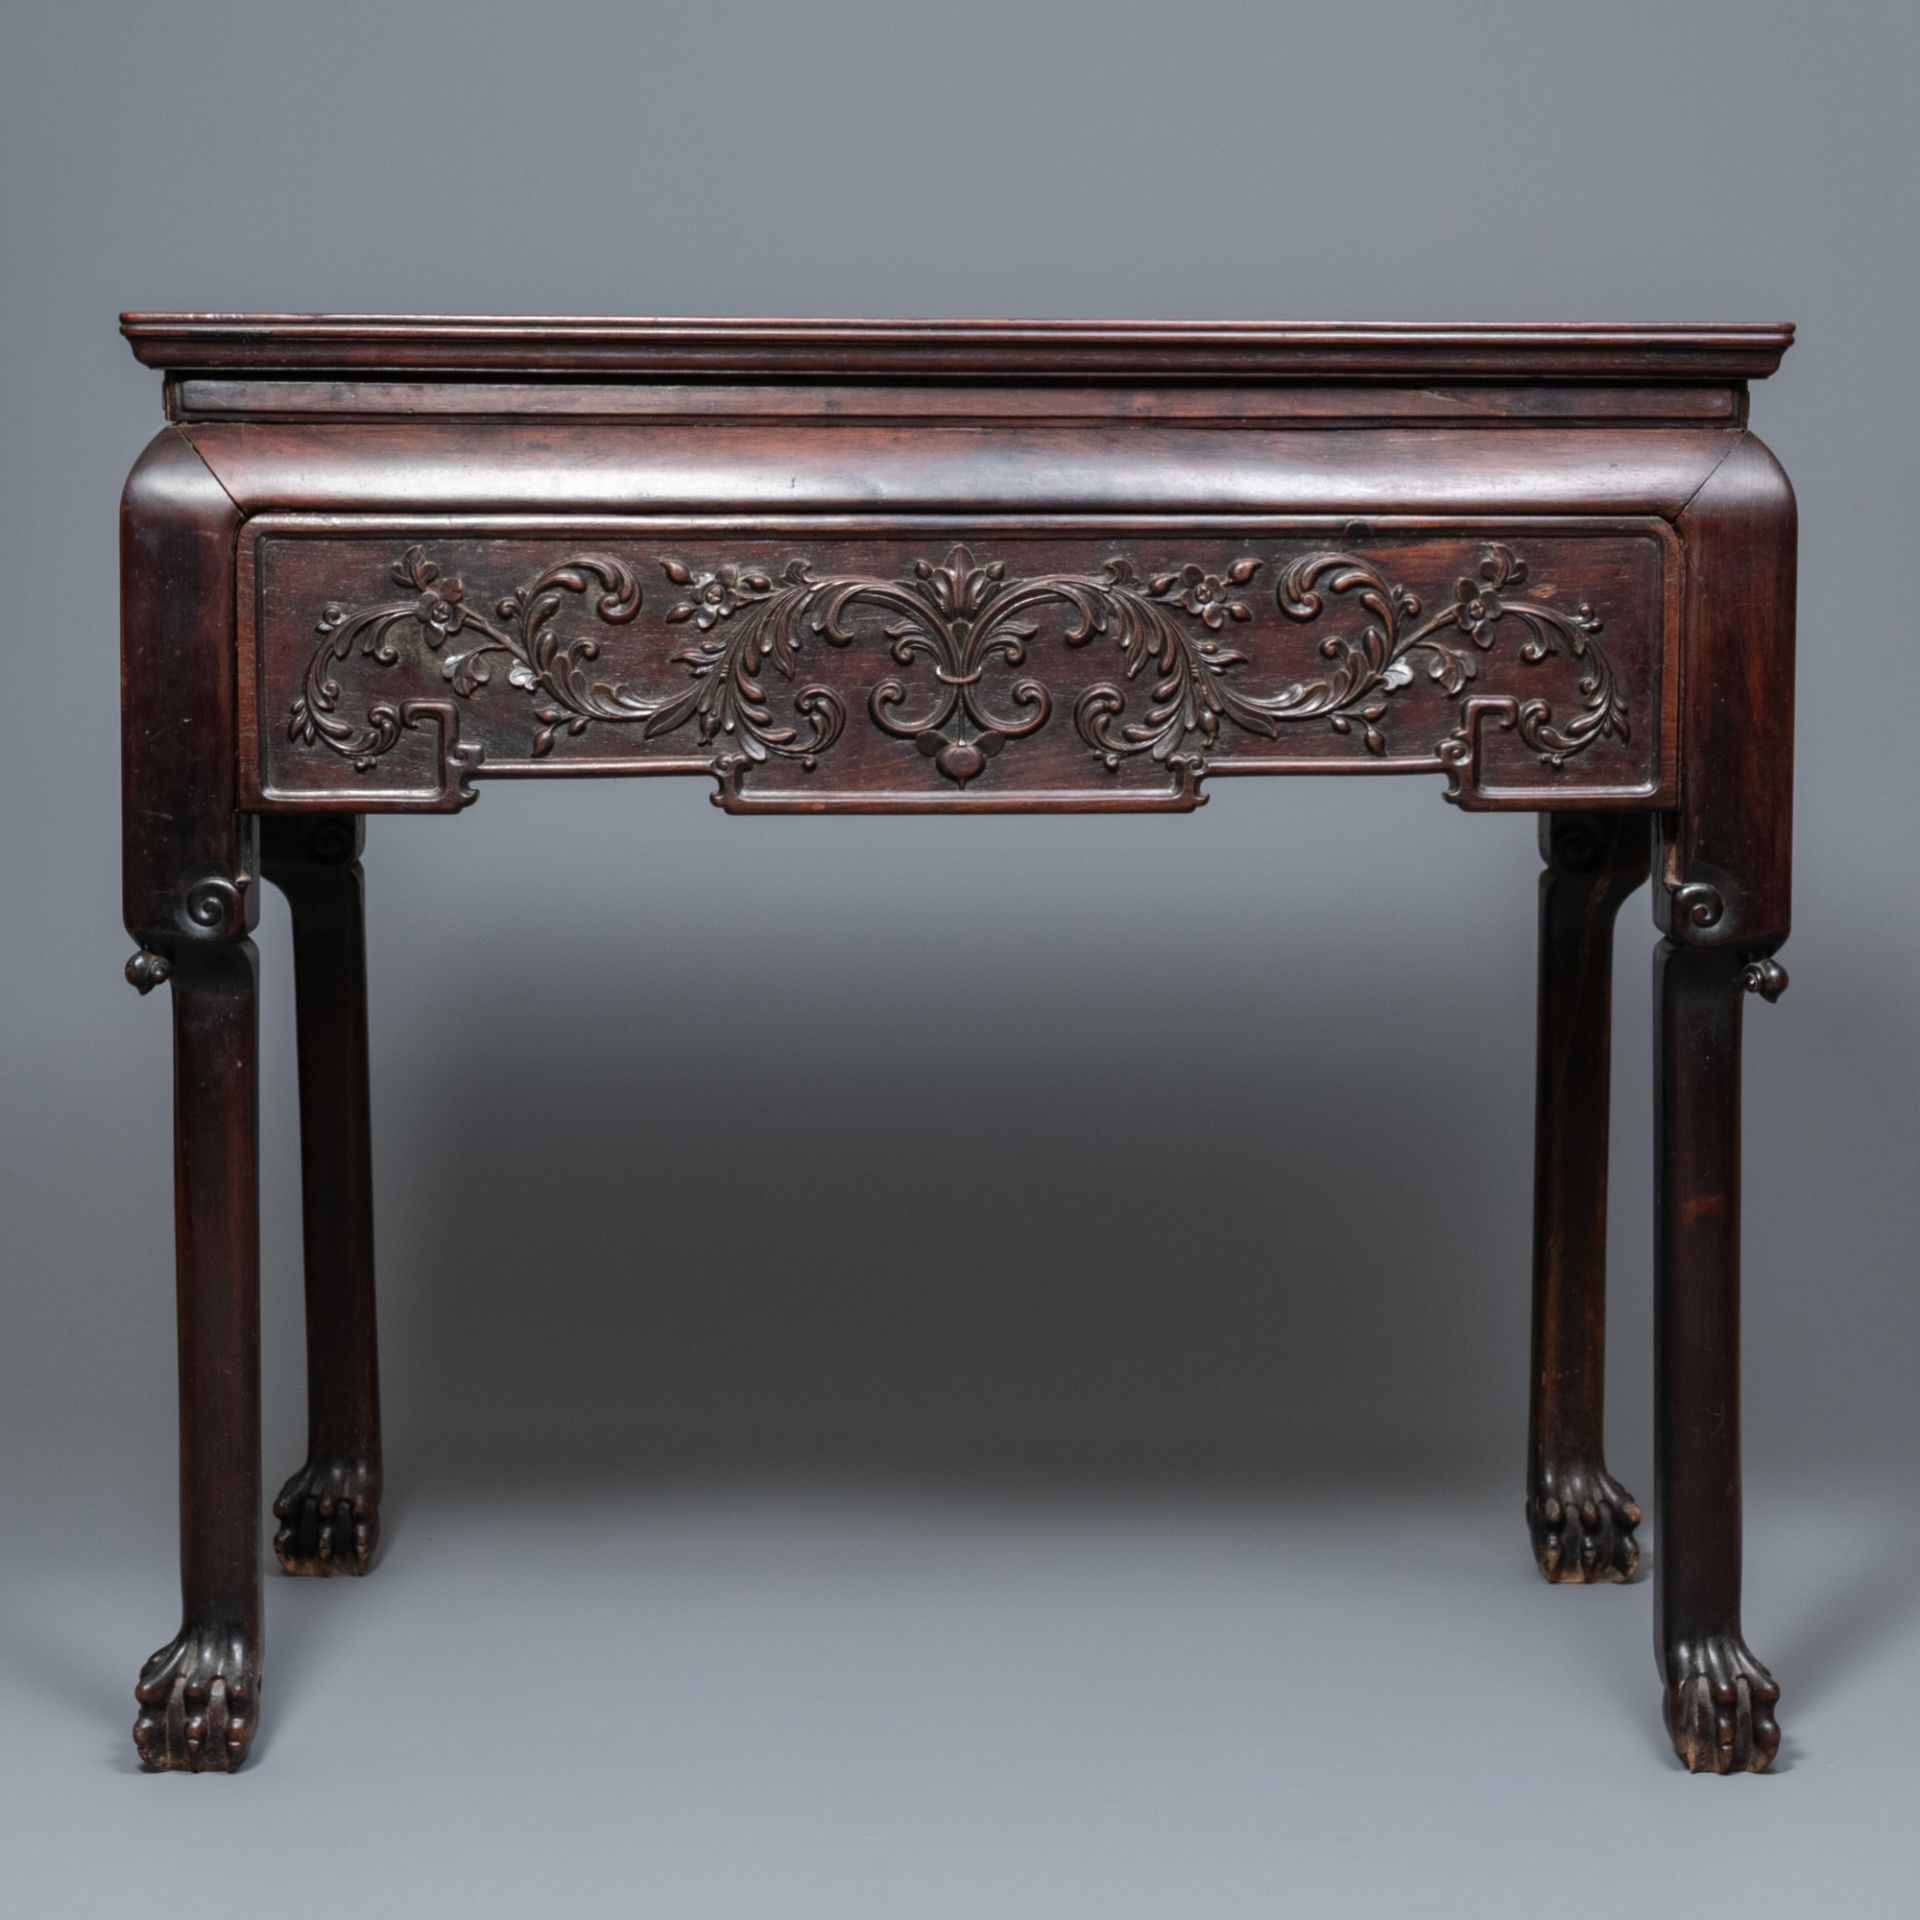 A Chinese wooden marble top table, 19/20th C. - Image 5 of 11